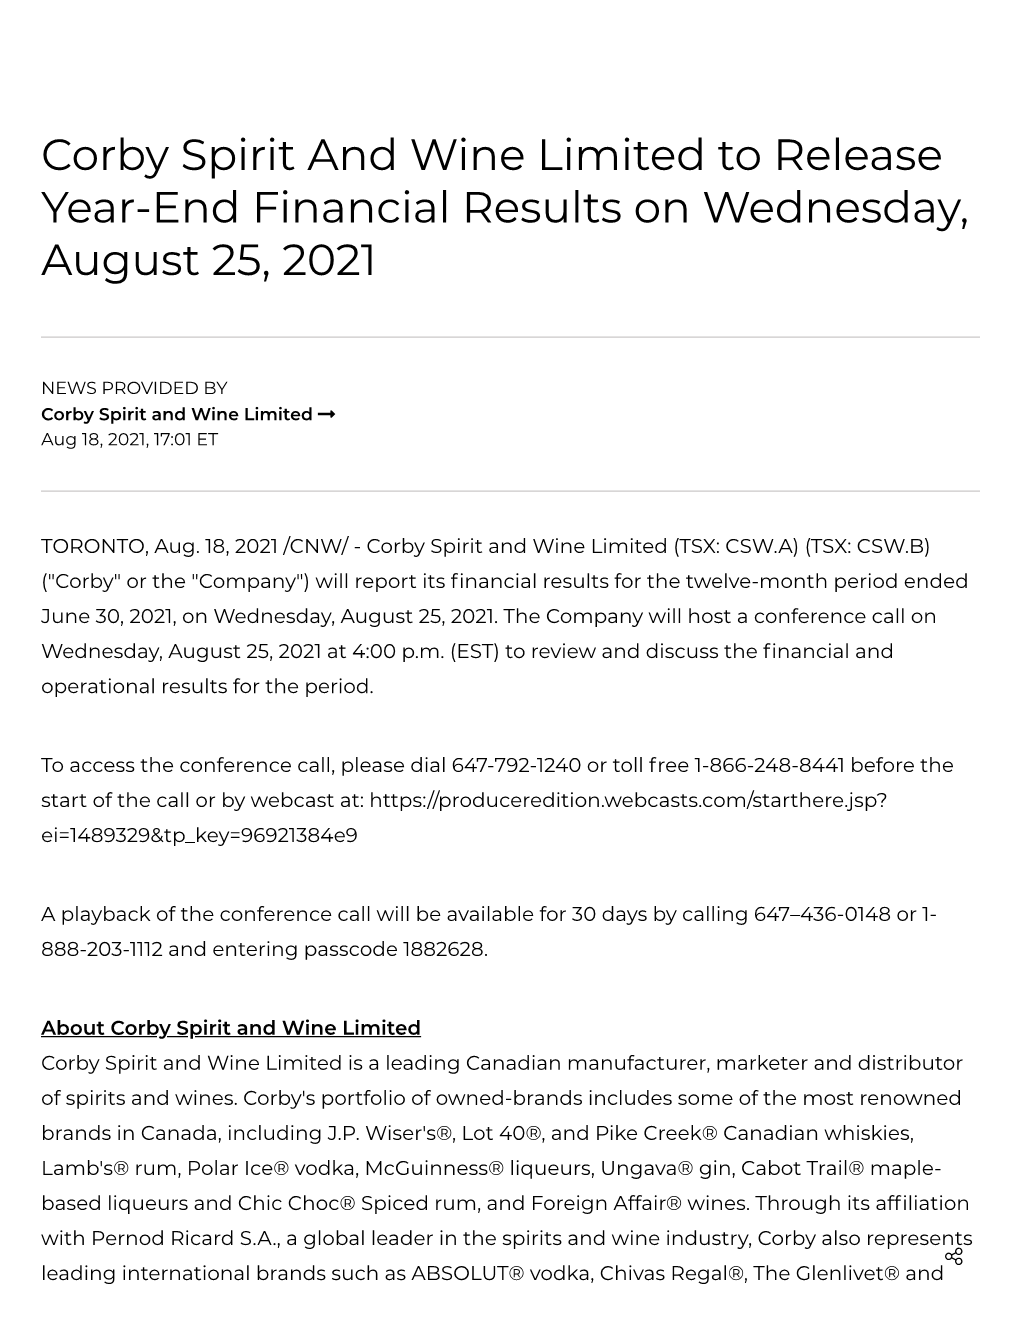 Corby Spirit and Wine Limited to Release Year-End Financial Results on Wednesday, August 25, 2021